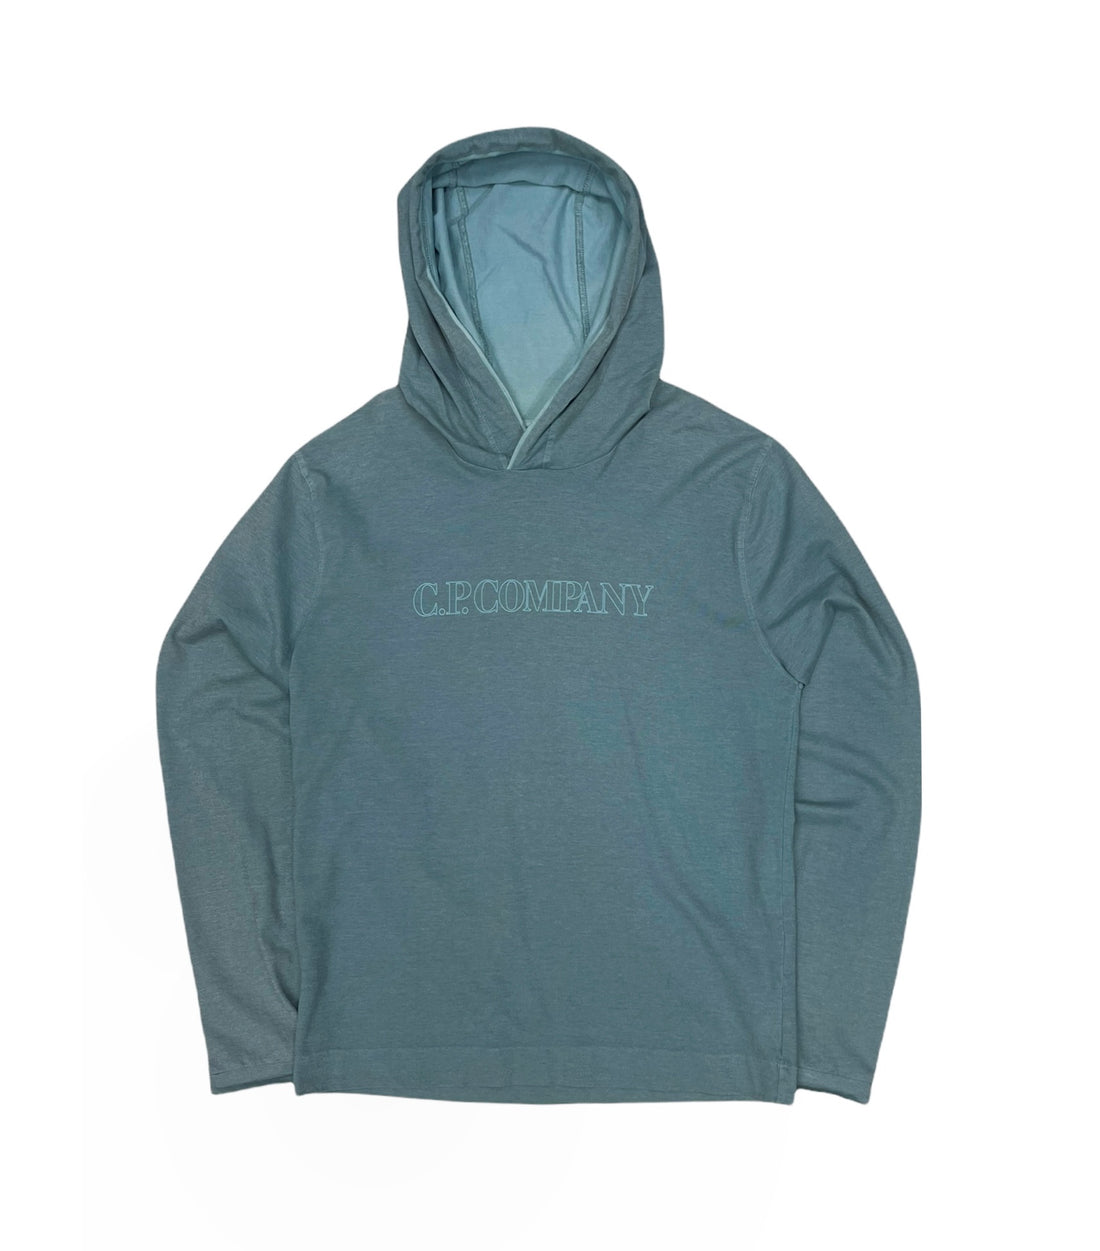 CP Company pullover light blue front logo print hoodie